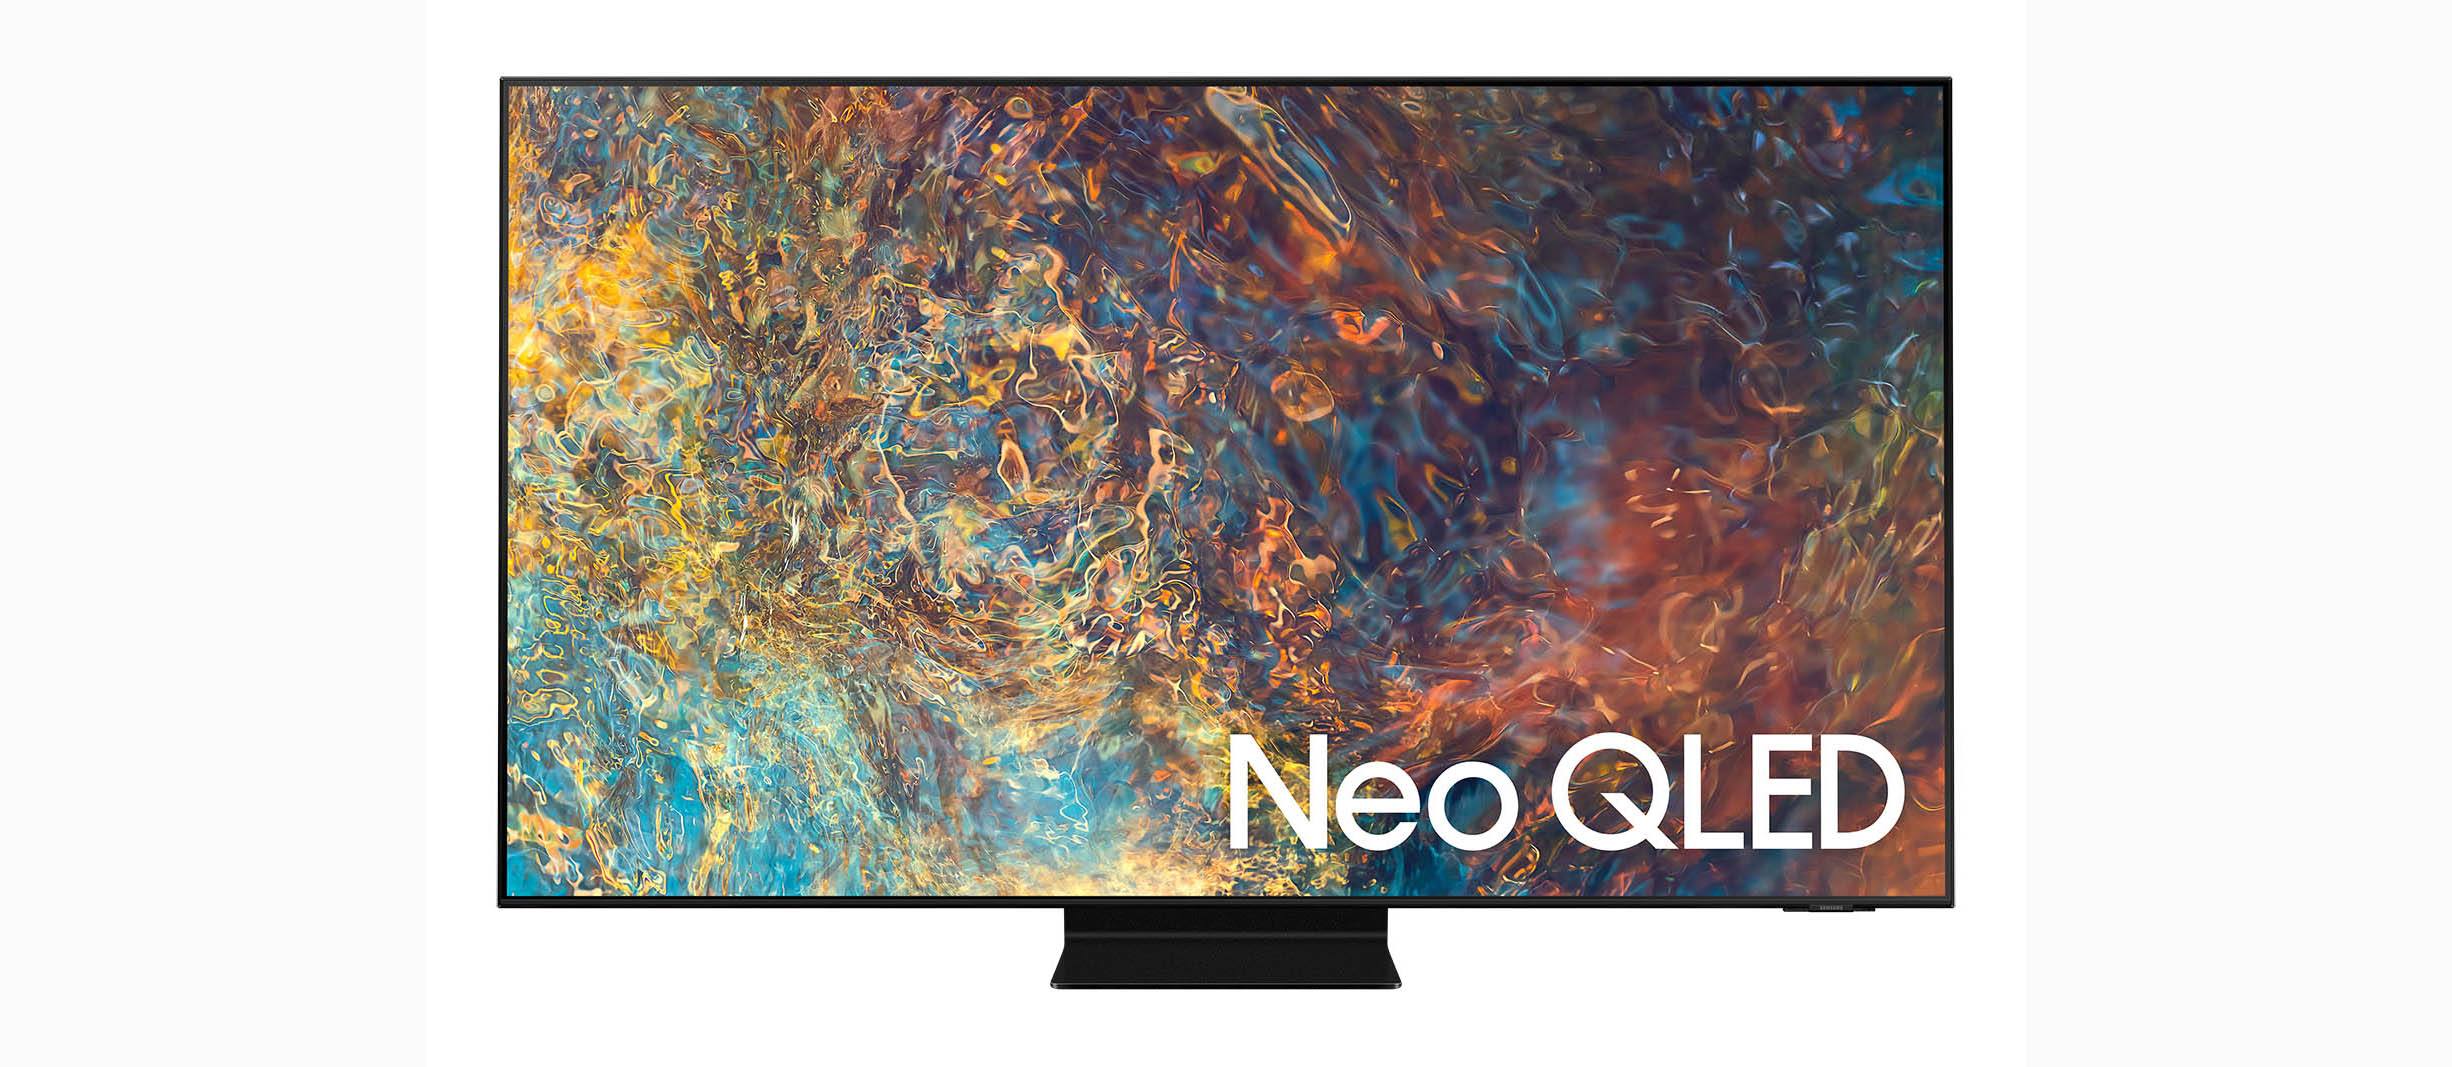 Samsung’s CES 2021 Lineup Includes Neo QLED, Massive MicroLED TVs